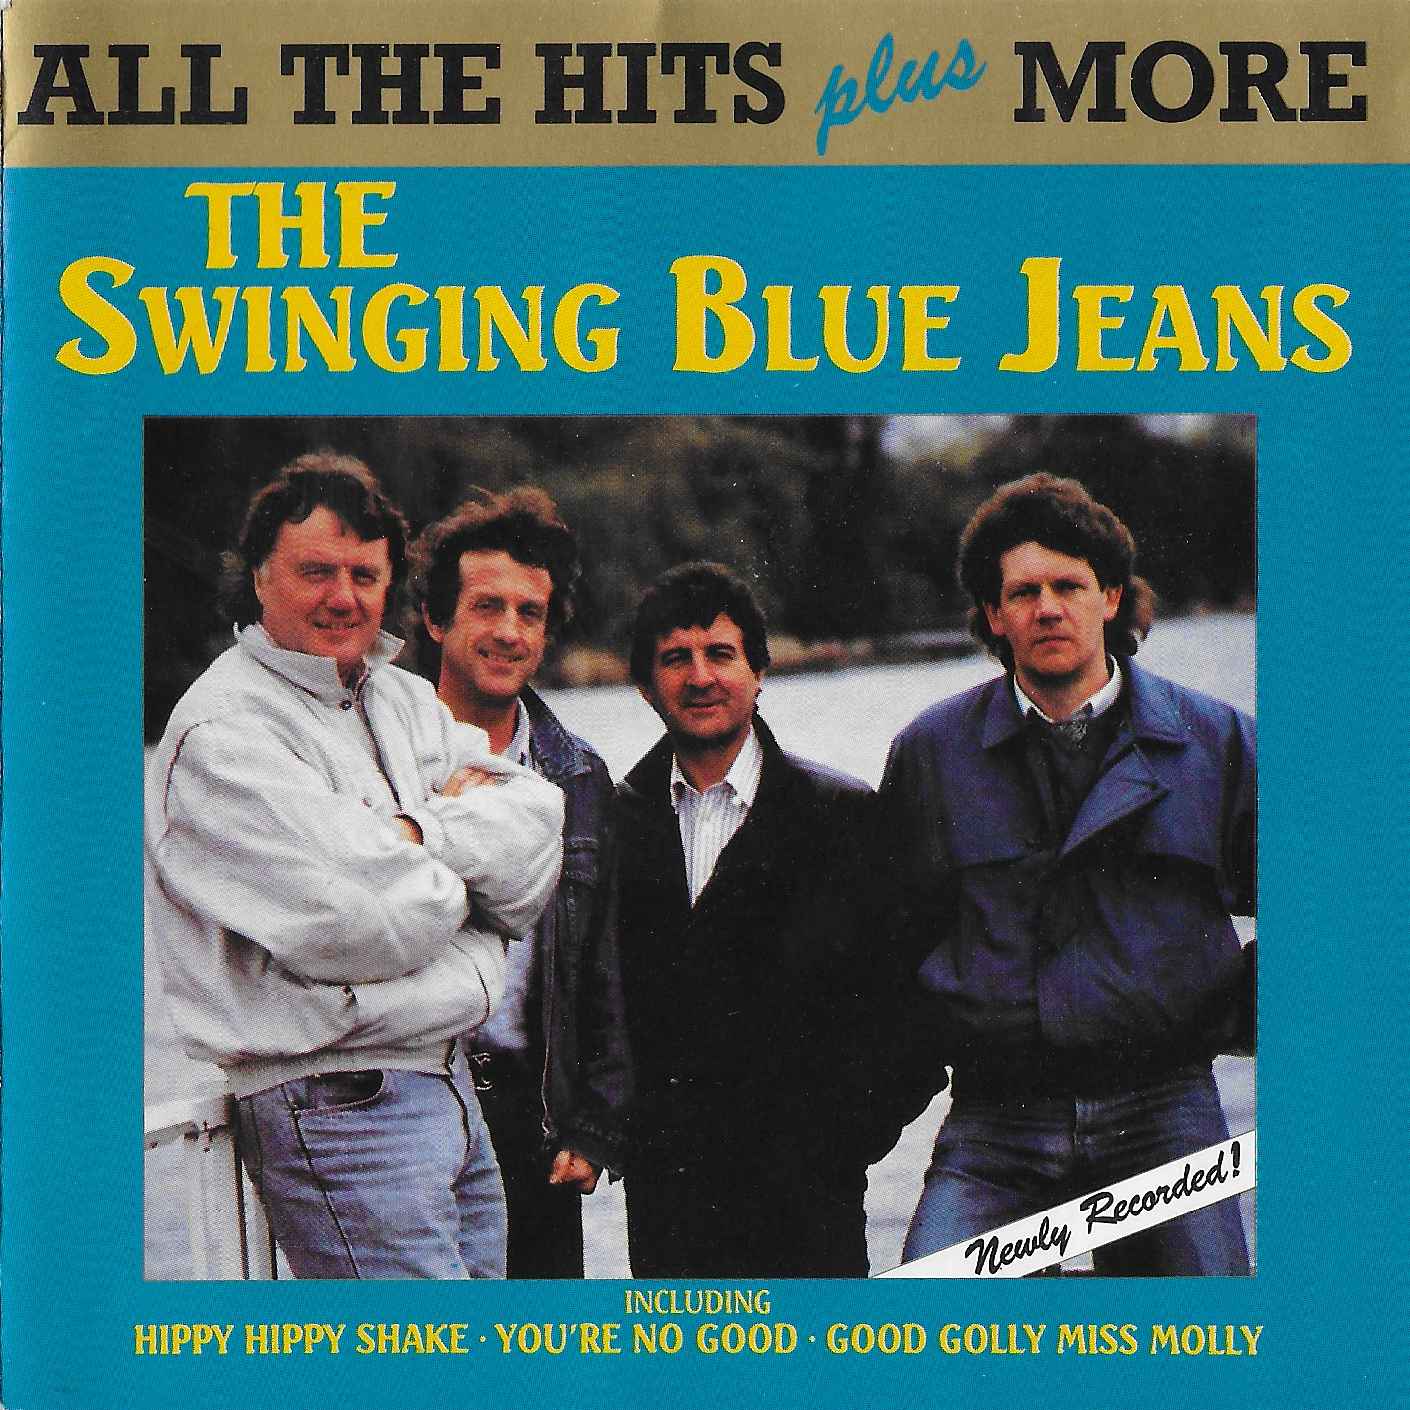 Picture of CDPT 003 All the hits plus more by artist Swinging Blue Jeans from the BBC cds - Records and Tapes library